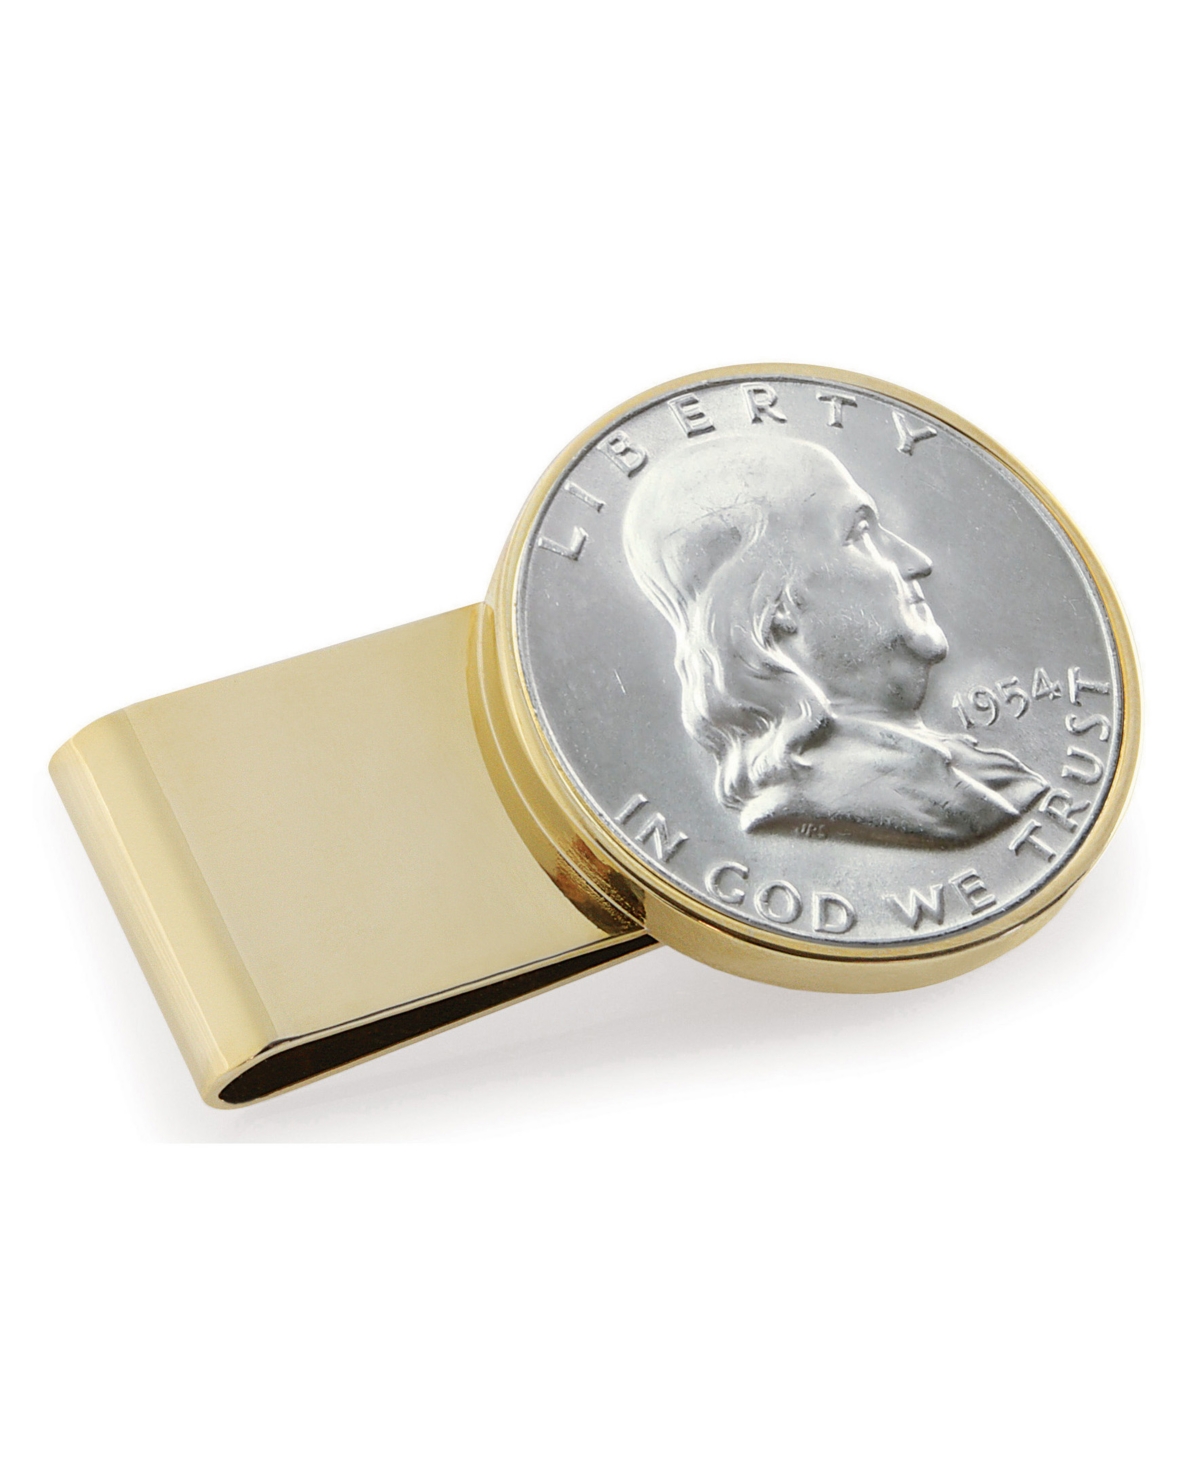 Men's American Coin Treasures Silver Franklin Half Dollar Stainless Steel Coin Money Clip - Gold